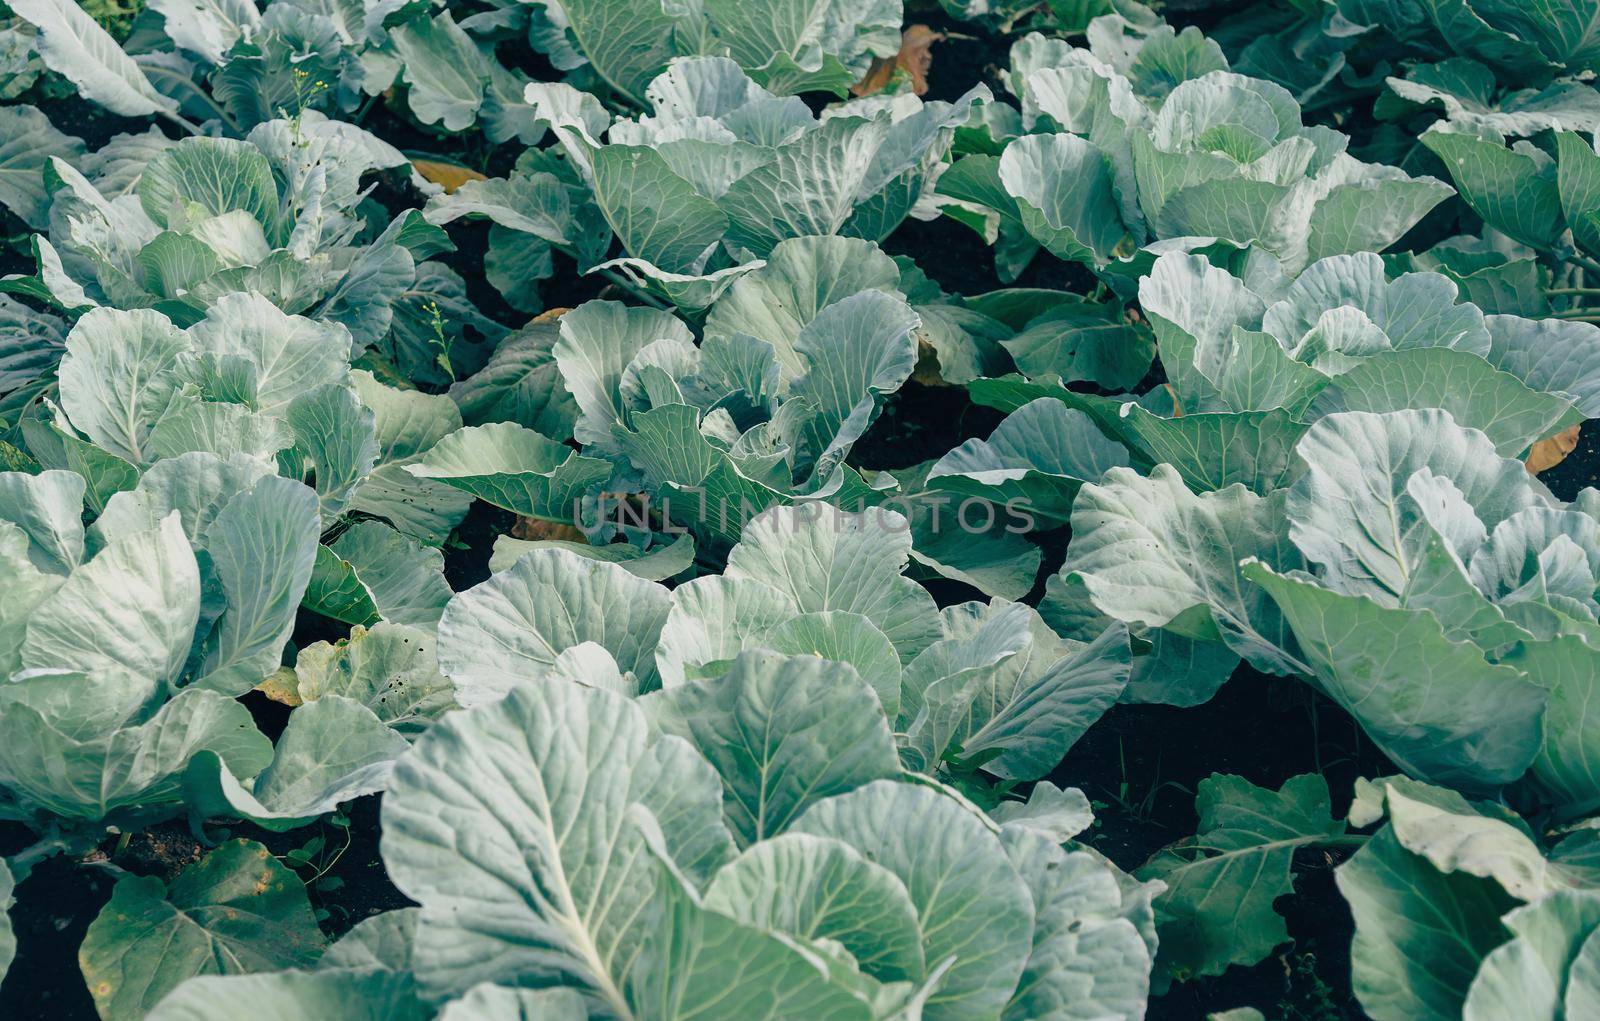 Green cabbages are growing in the garden on fertile soil